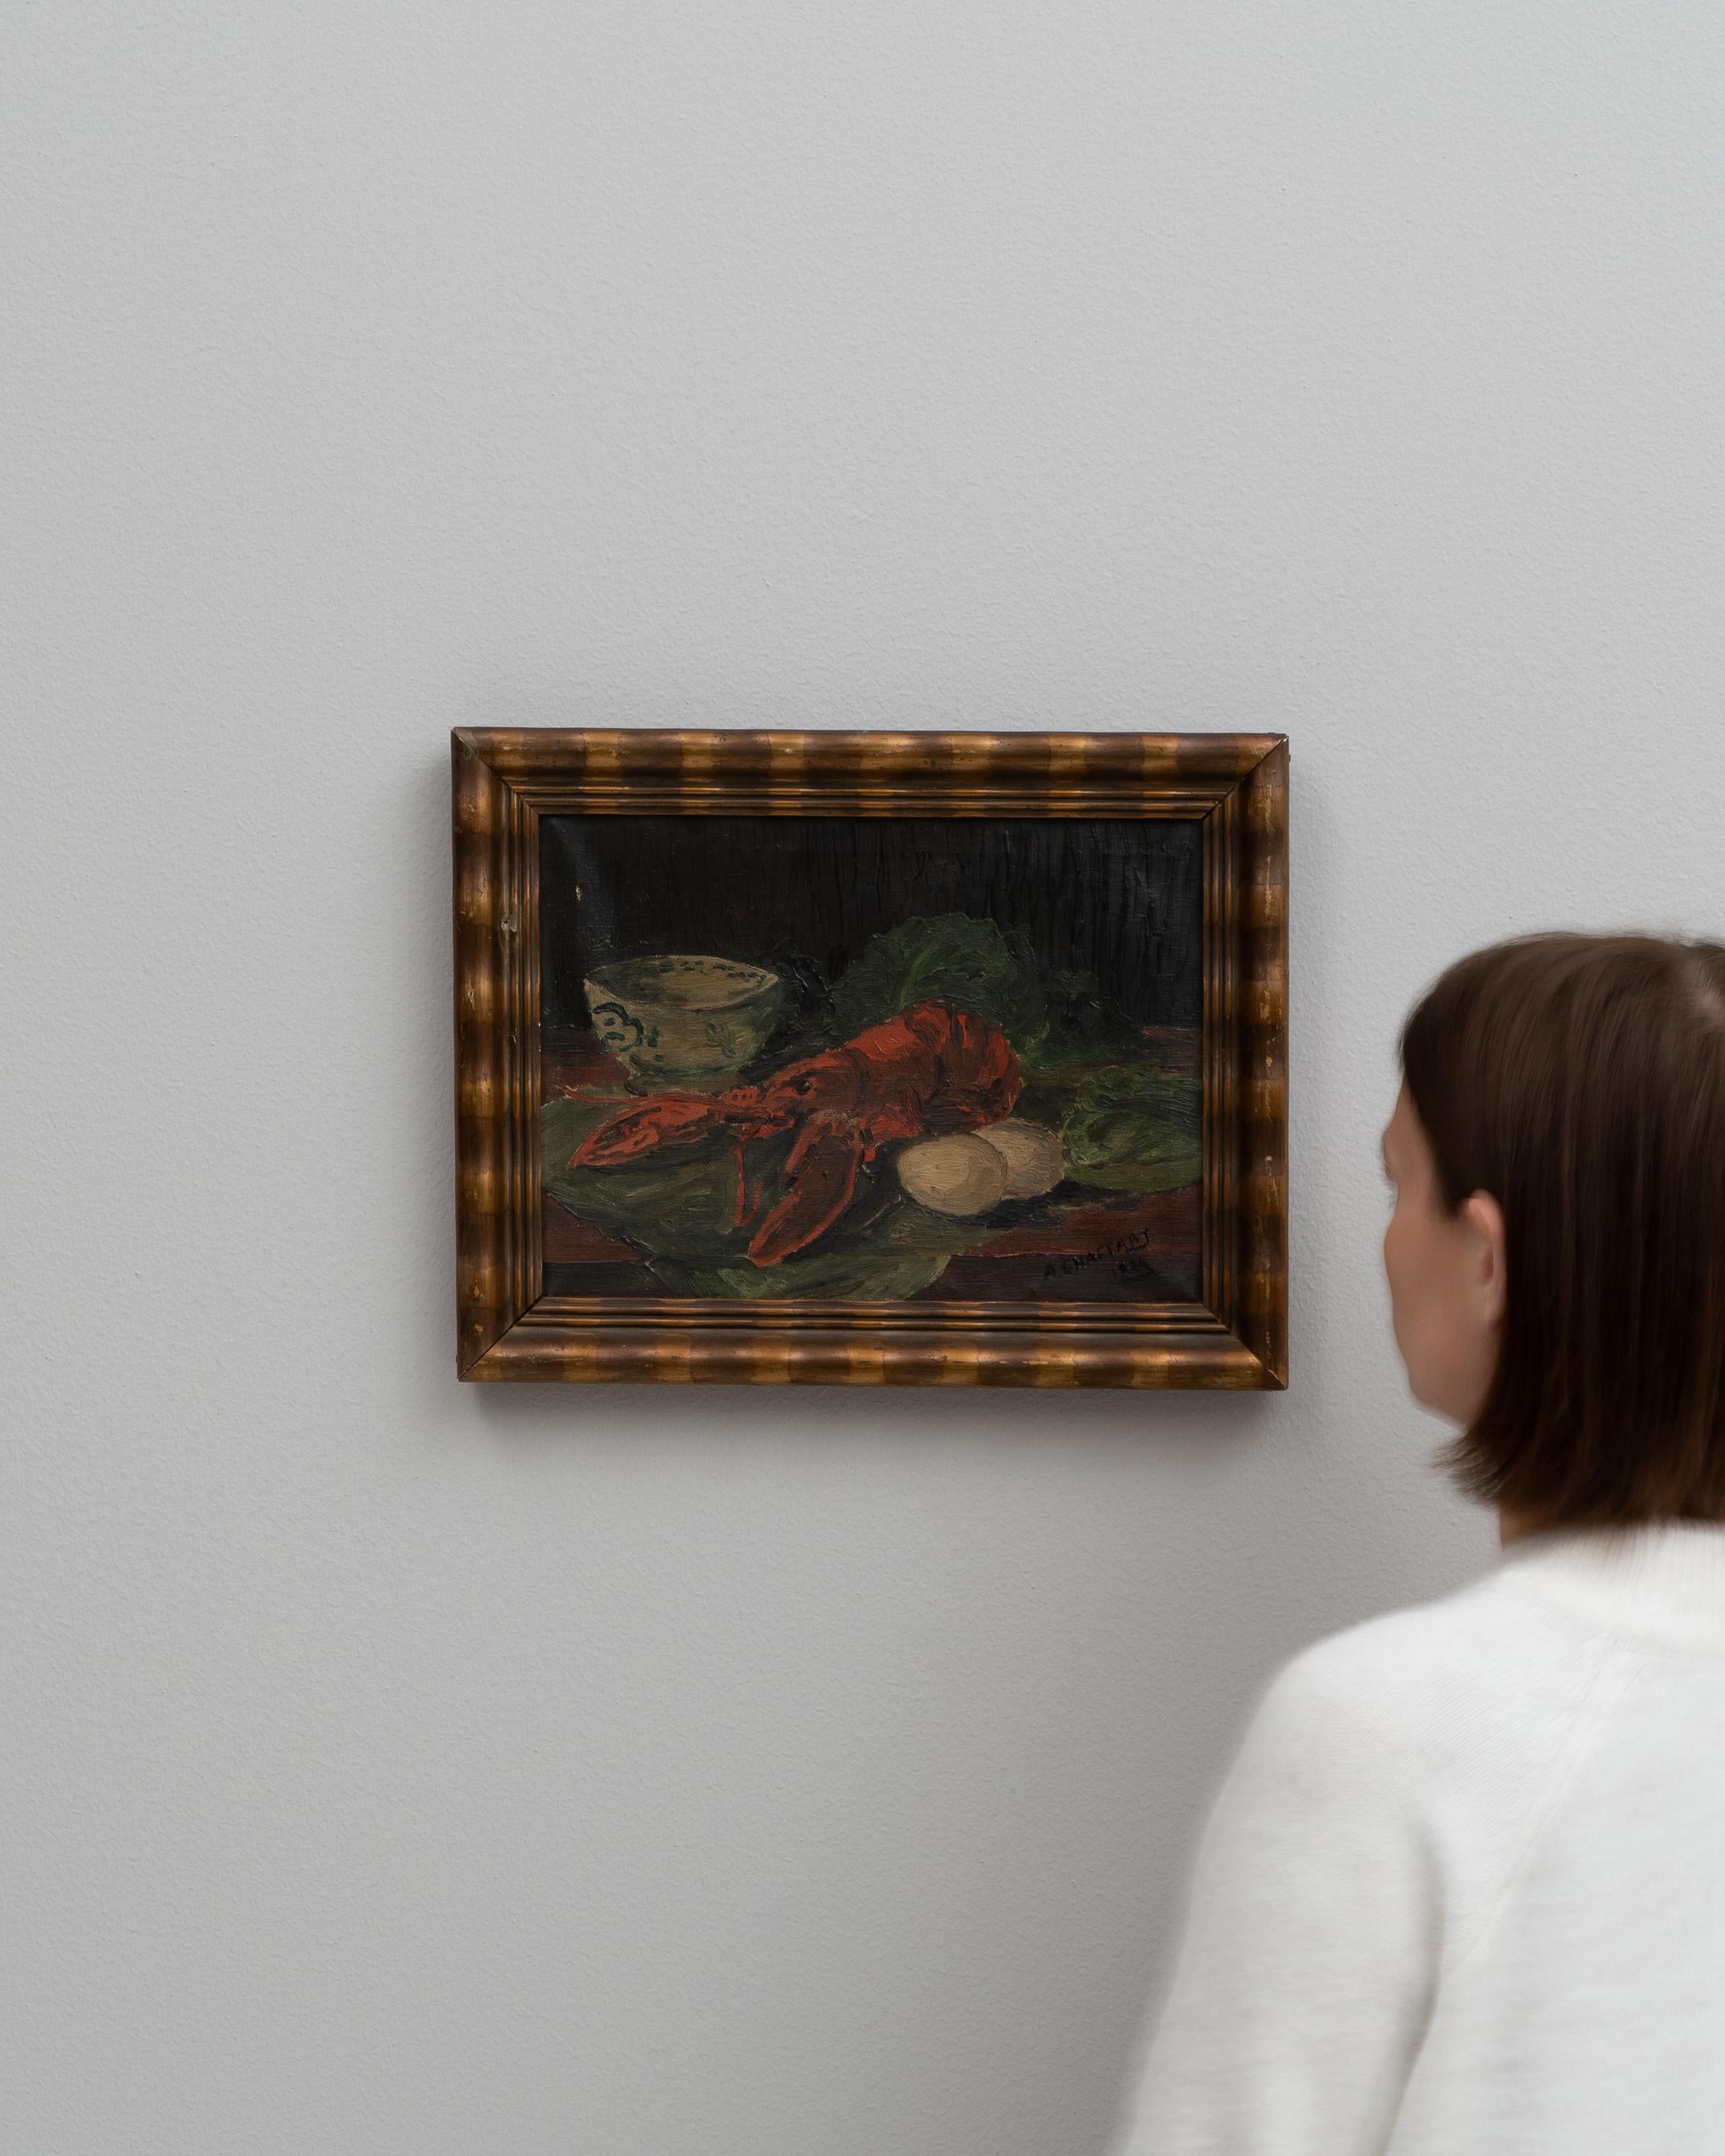 This evocative early 20th-century Belgian painting captures a rich, moody still life with a striking visual impact. The deep, dark tones set a dramatic backdrop for the vibrant red of the lobster, which becomes the undeniable focal point of the